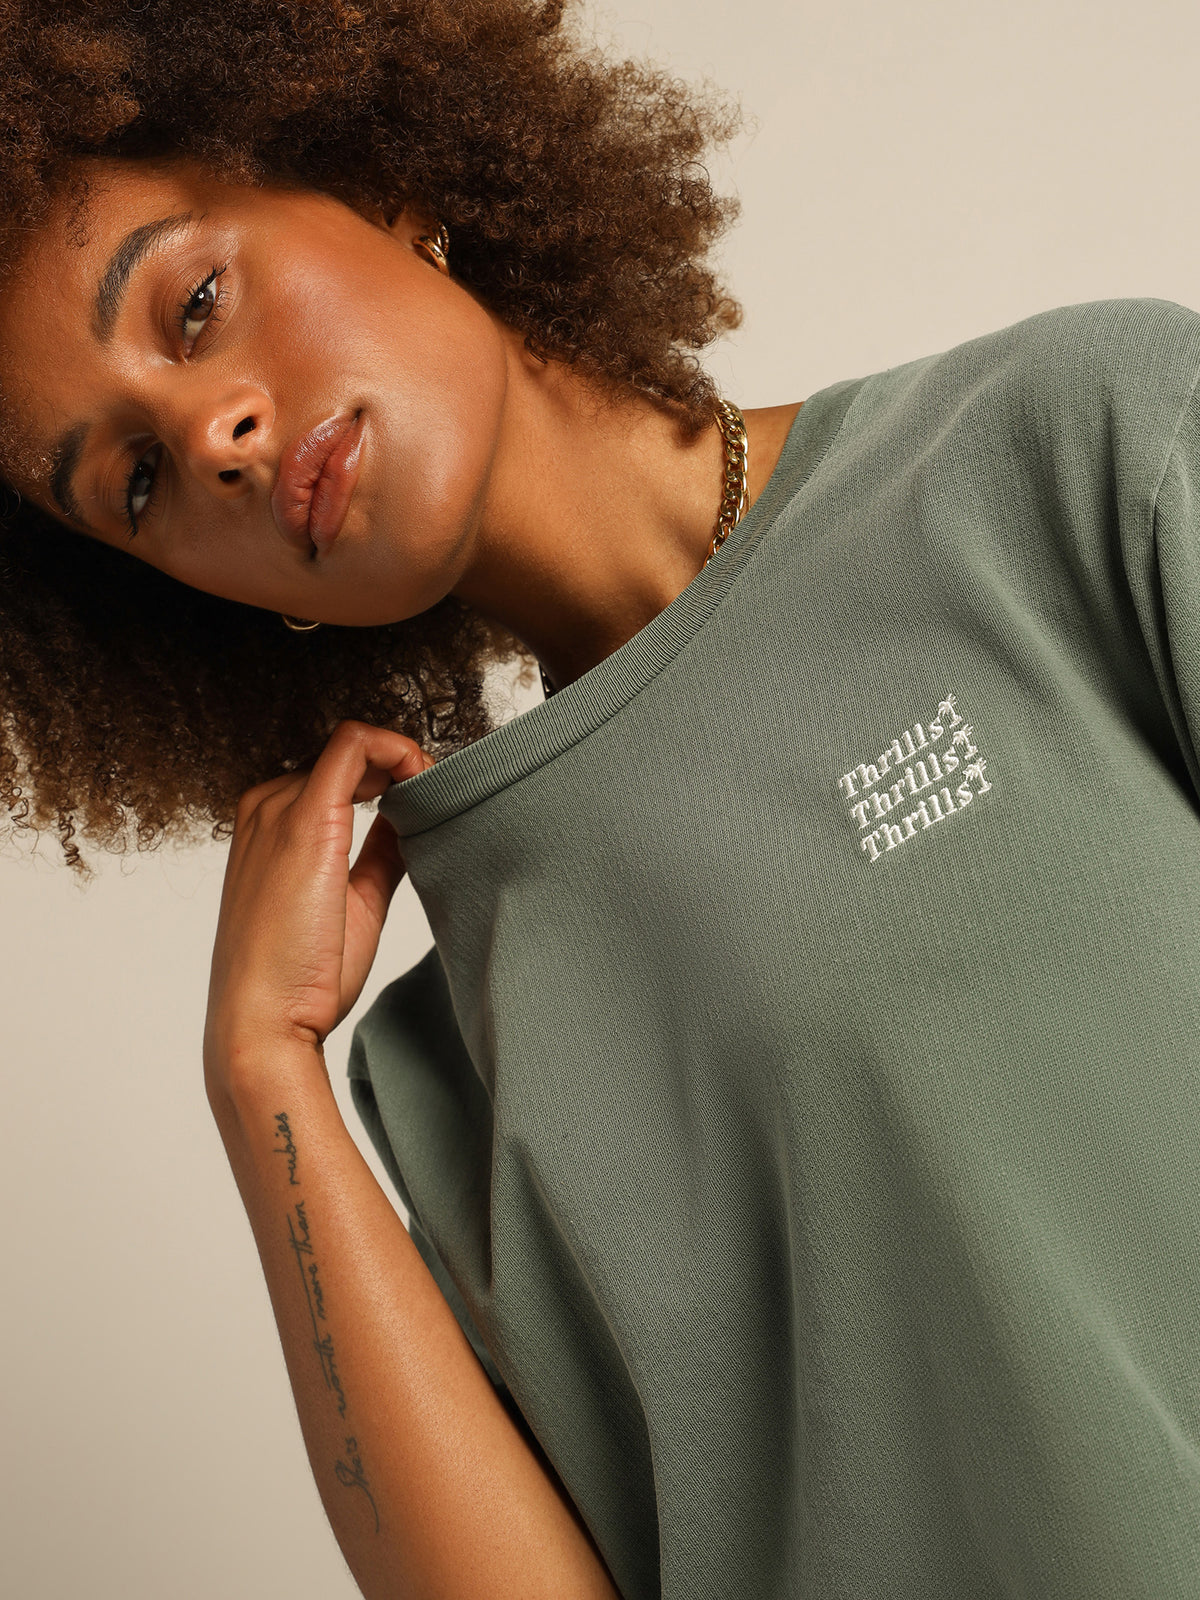 Embro Unlimited Merch Fit T-Shirt in Lume Green